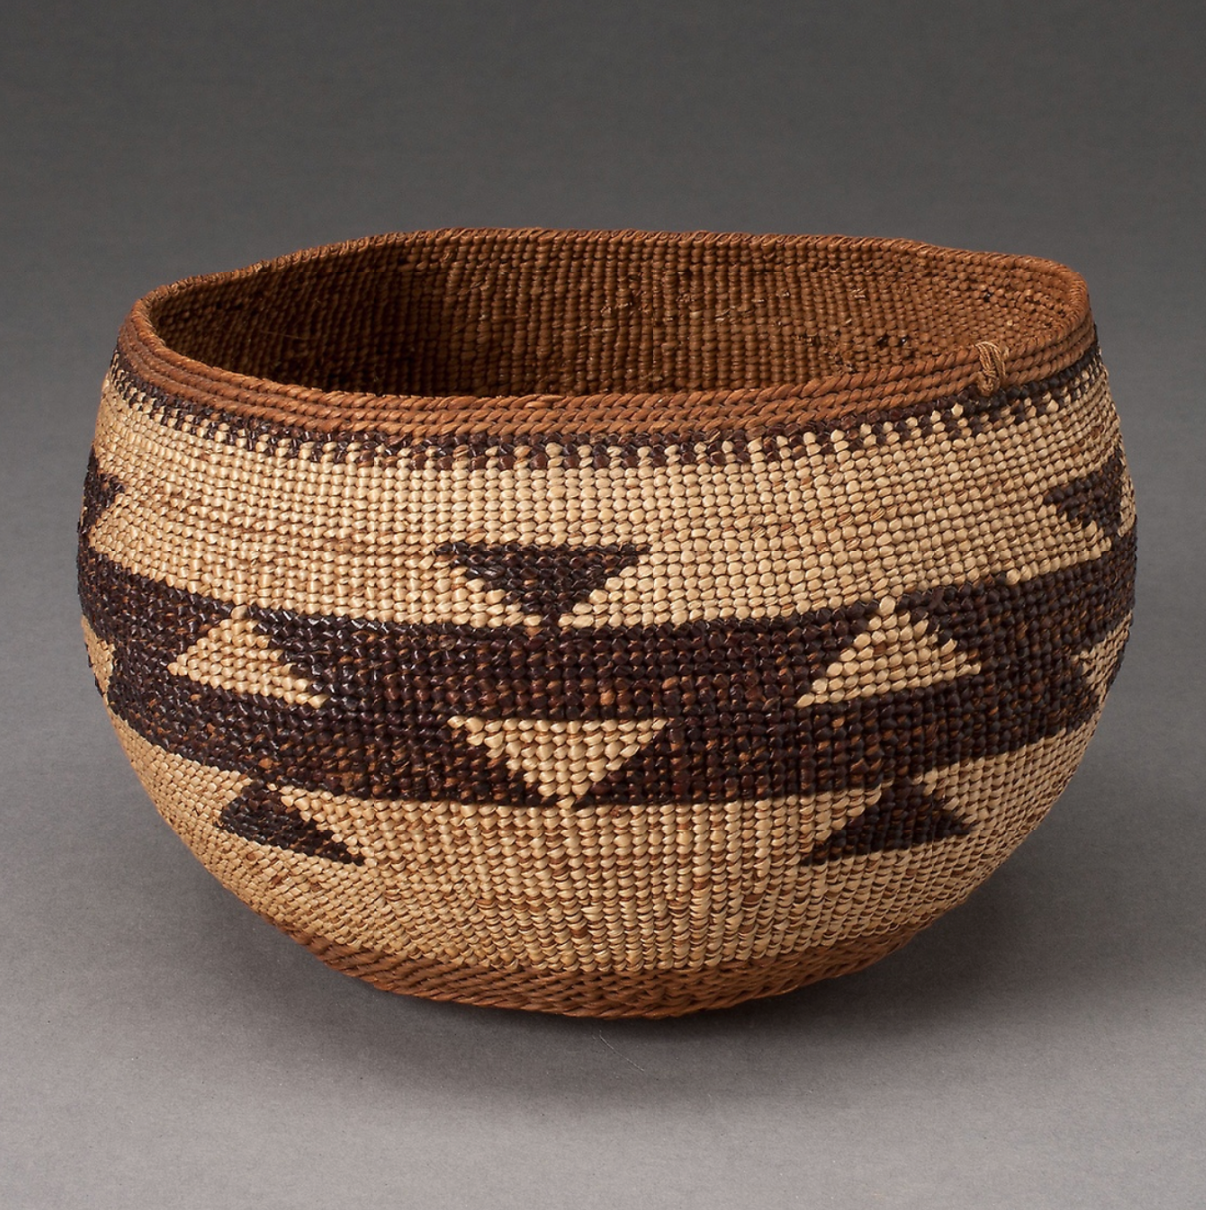 California Native Basketry, Fire and Traditional Ecological Knowledge